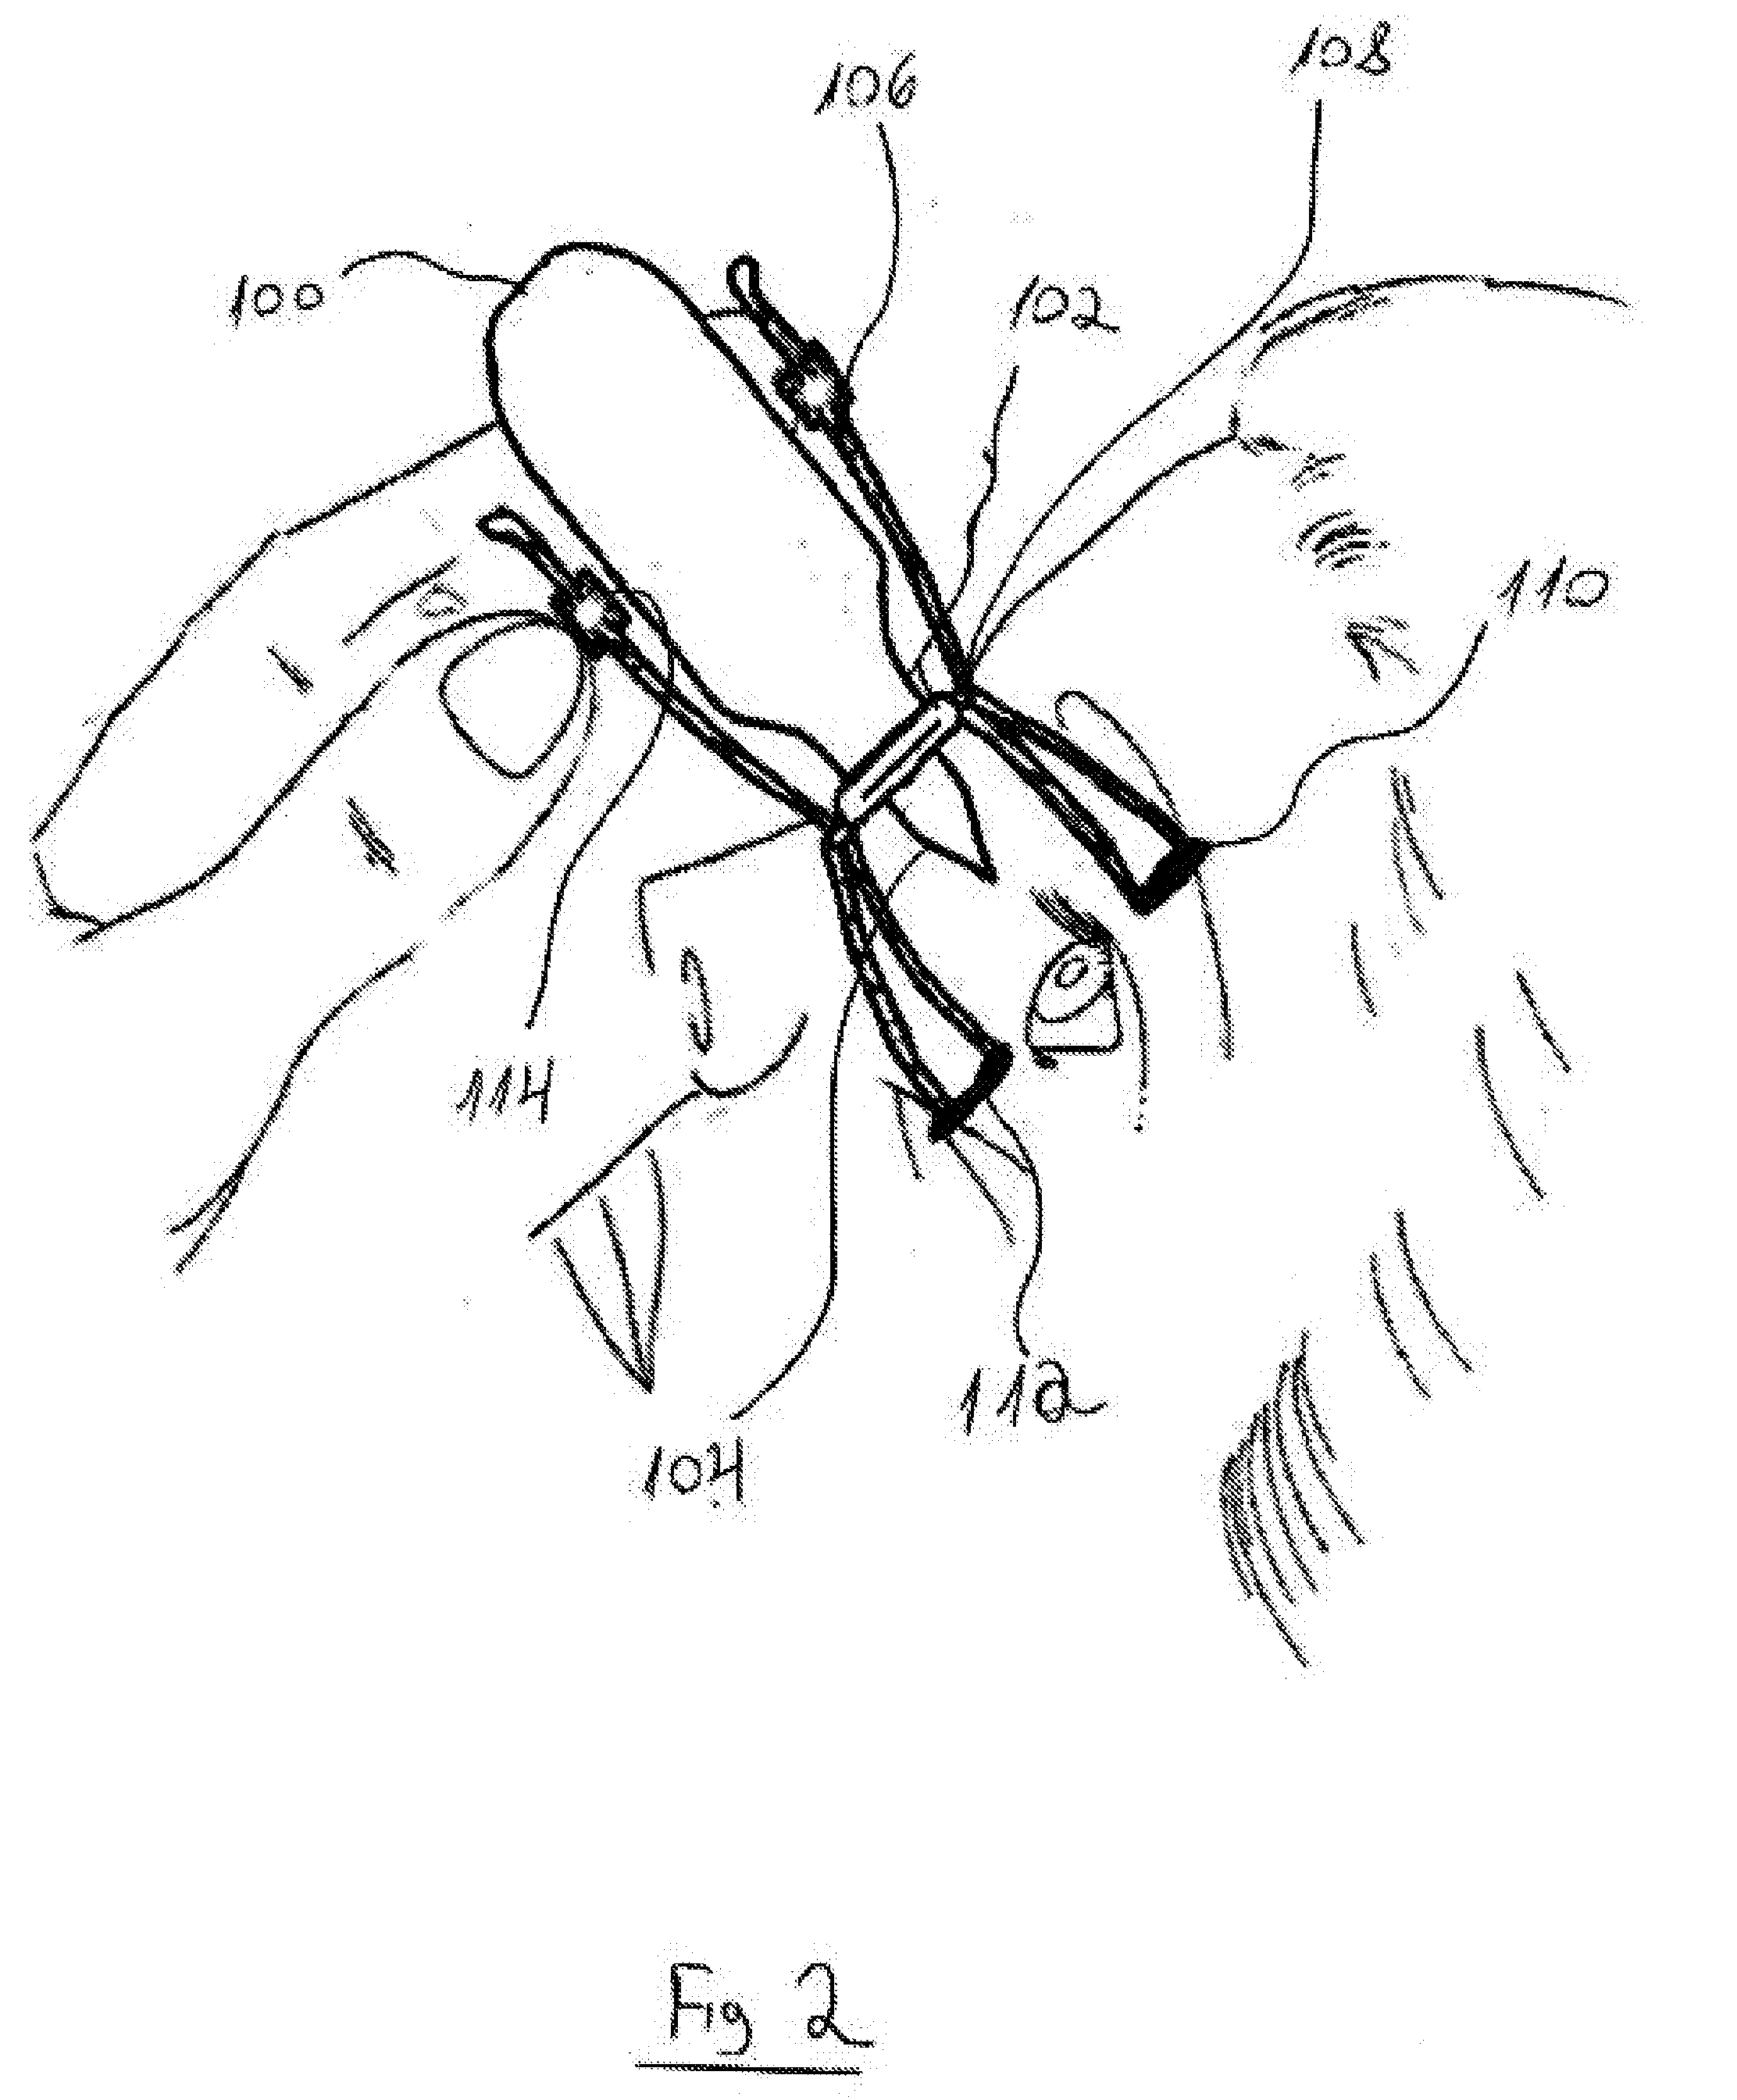 Method and Device for Applying Eye Drops